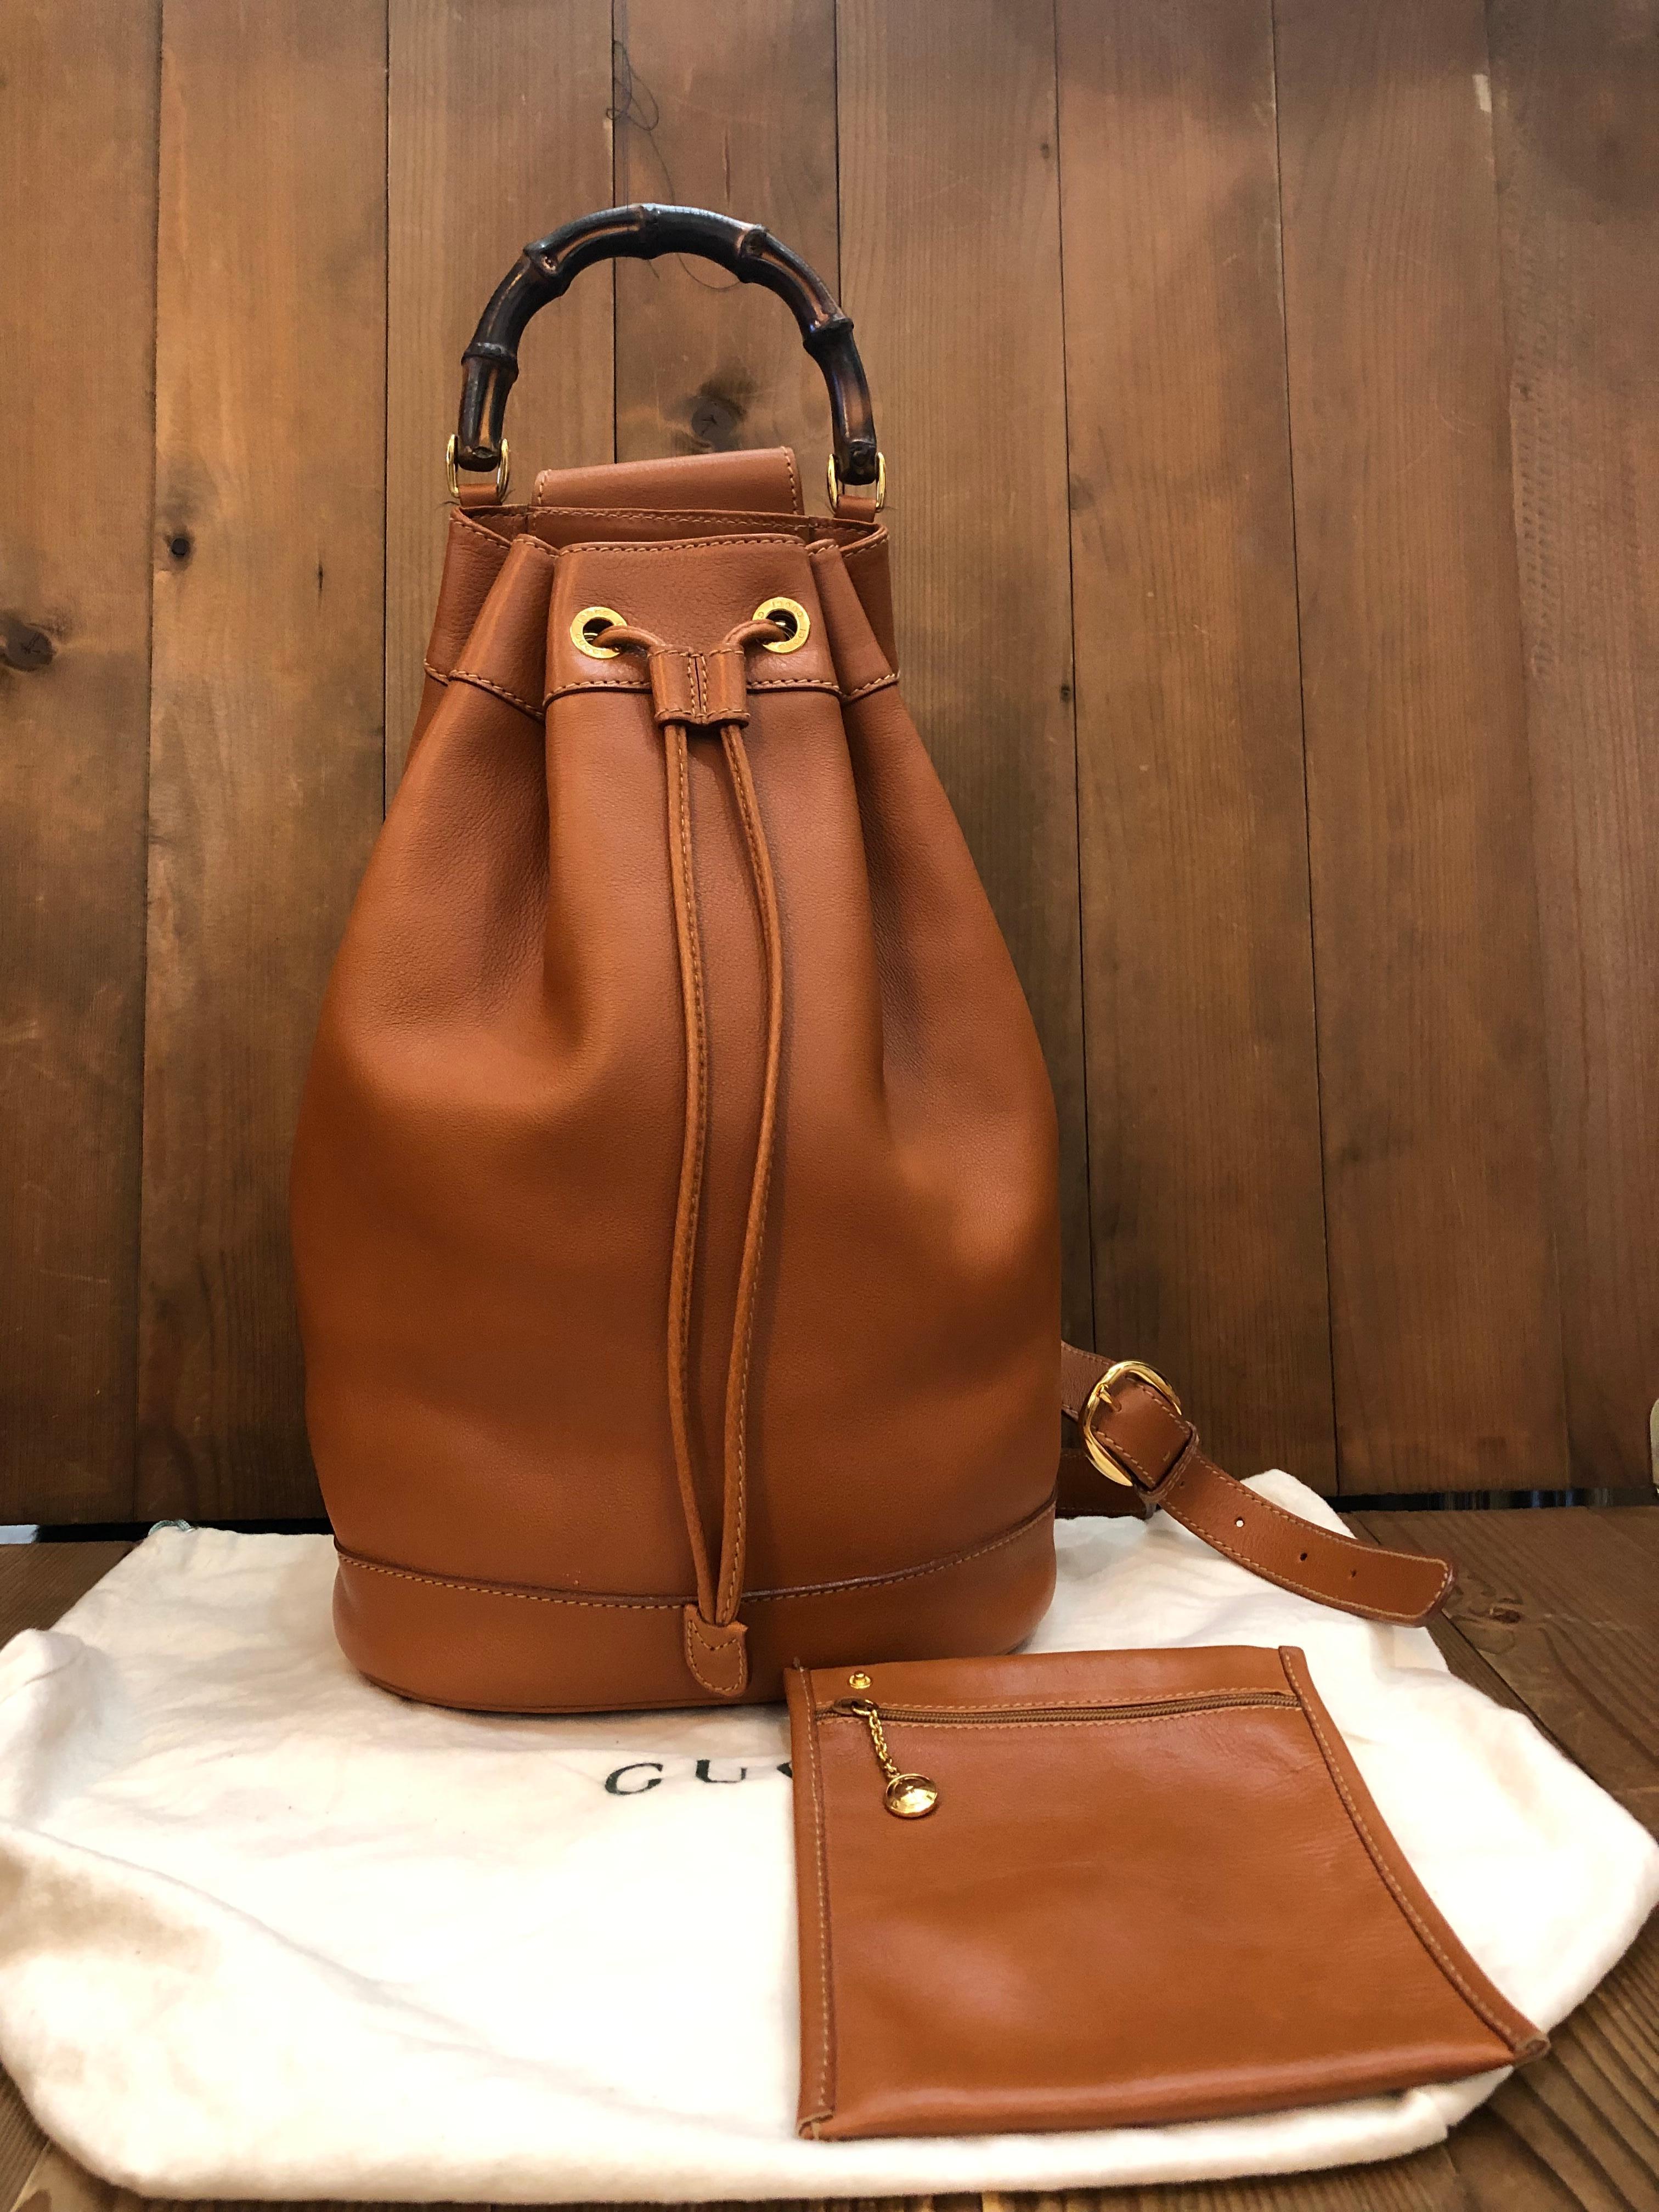 This GUCCI bucket shoulder bag is crafted of soft smooth calfskin leather in caramel featuring gold toned hardware and a bamboo handle. Top drawstring closure opens to unlined interior featuring a detachable zippered pouch of the same leather.